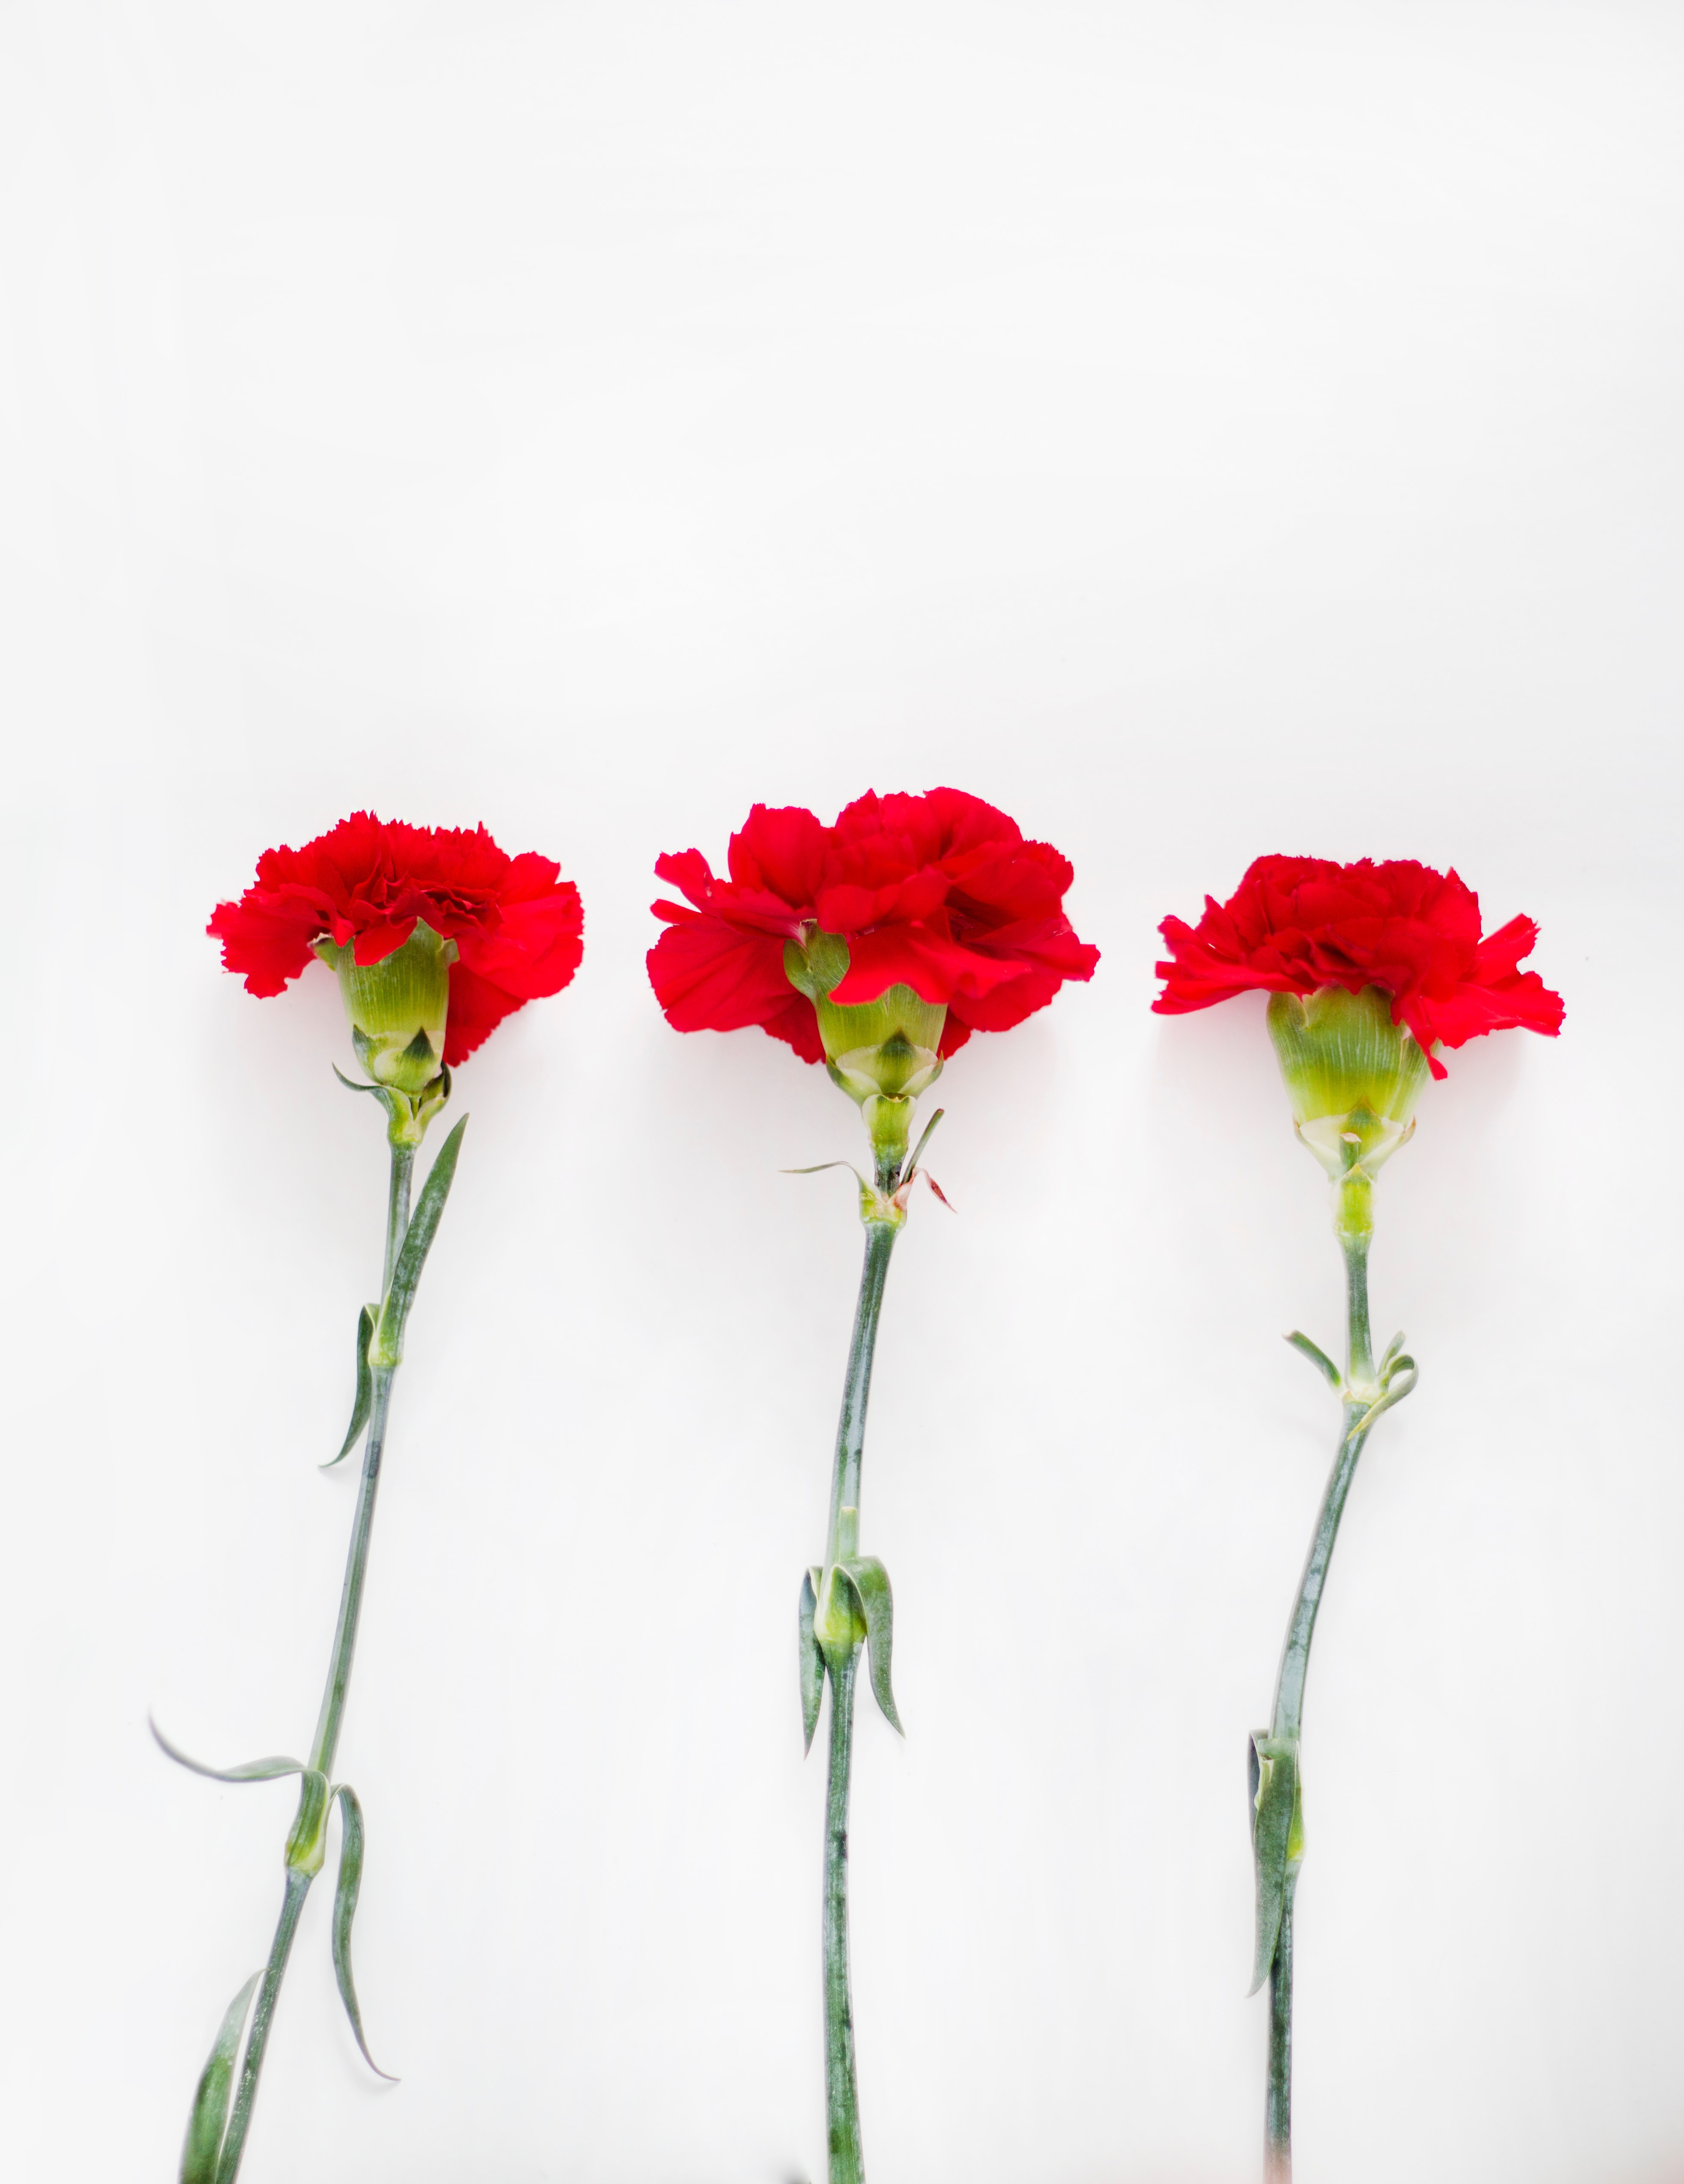 Fun Facts About Carnations